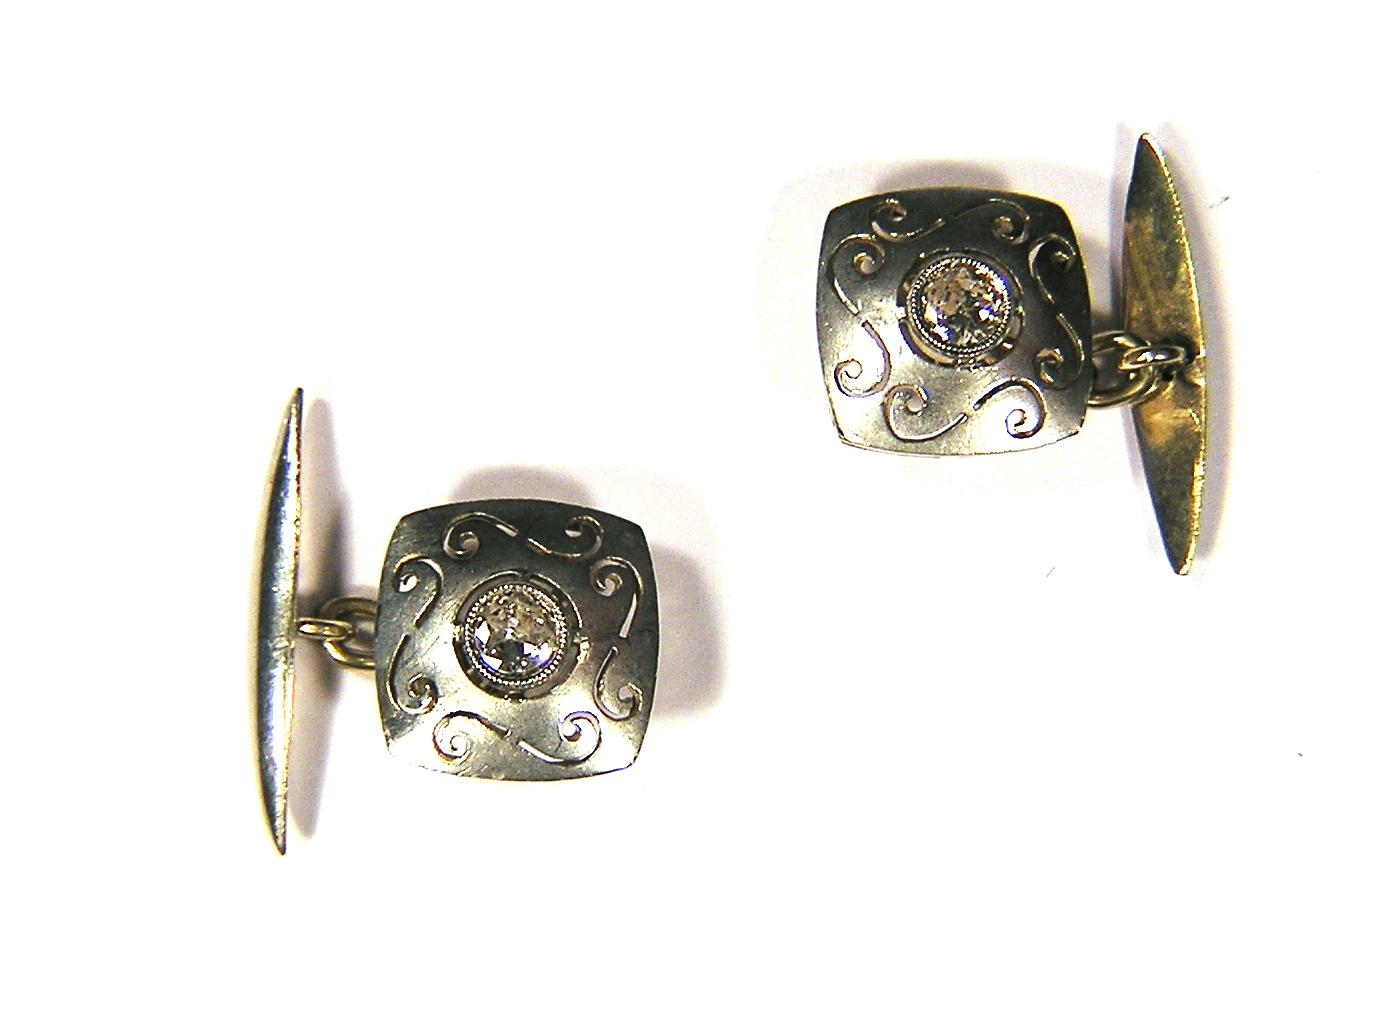 1920s cufflinks in silver and yellow gold with diamonds 0.20 ctw circa.
Size: 14 mm / 0,551 inches
Ready for delivery. It can be shipped with express delivery on